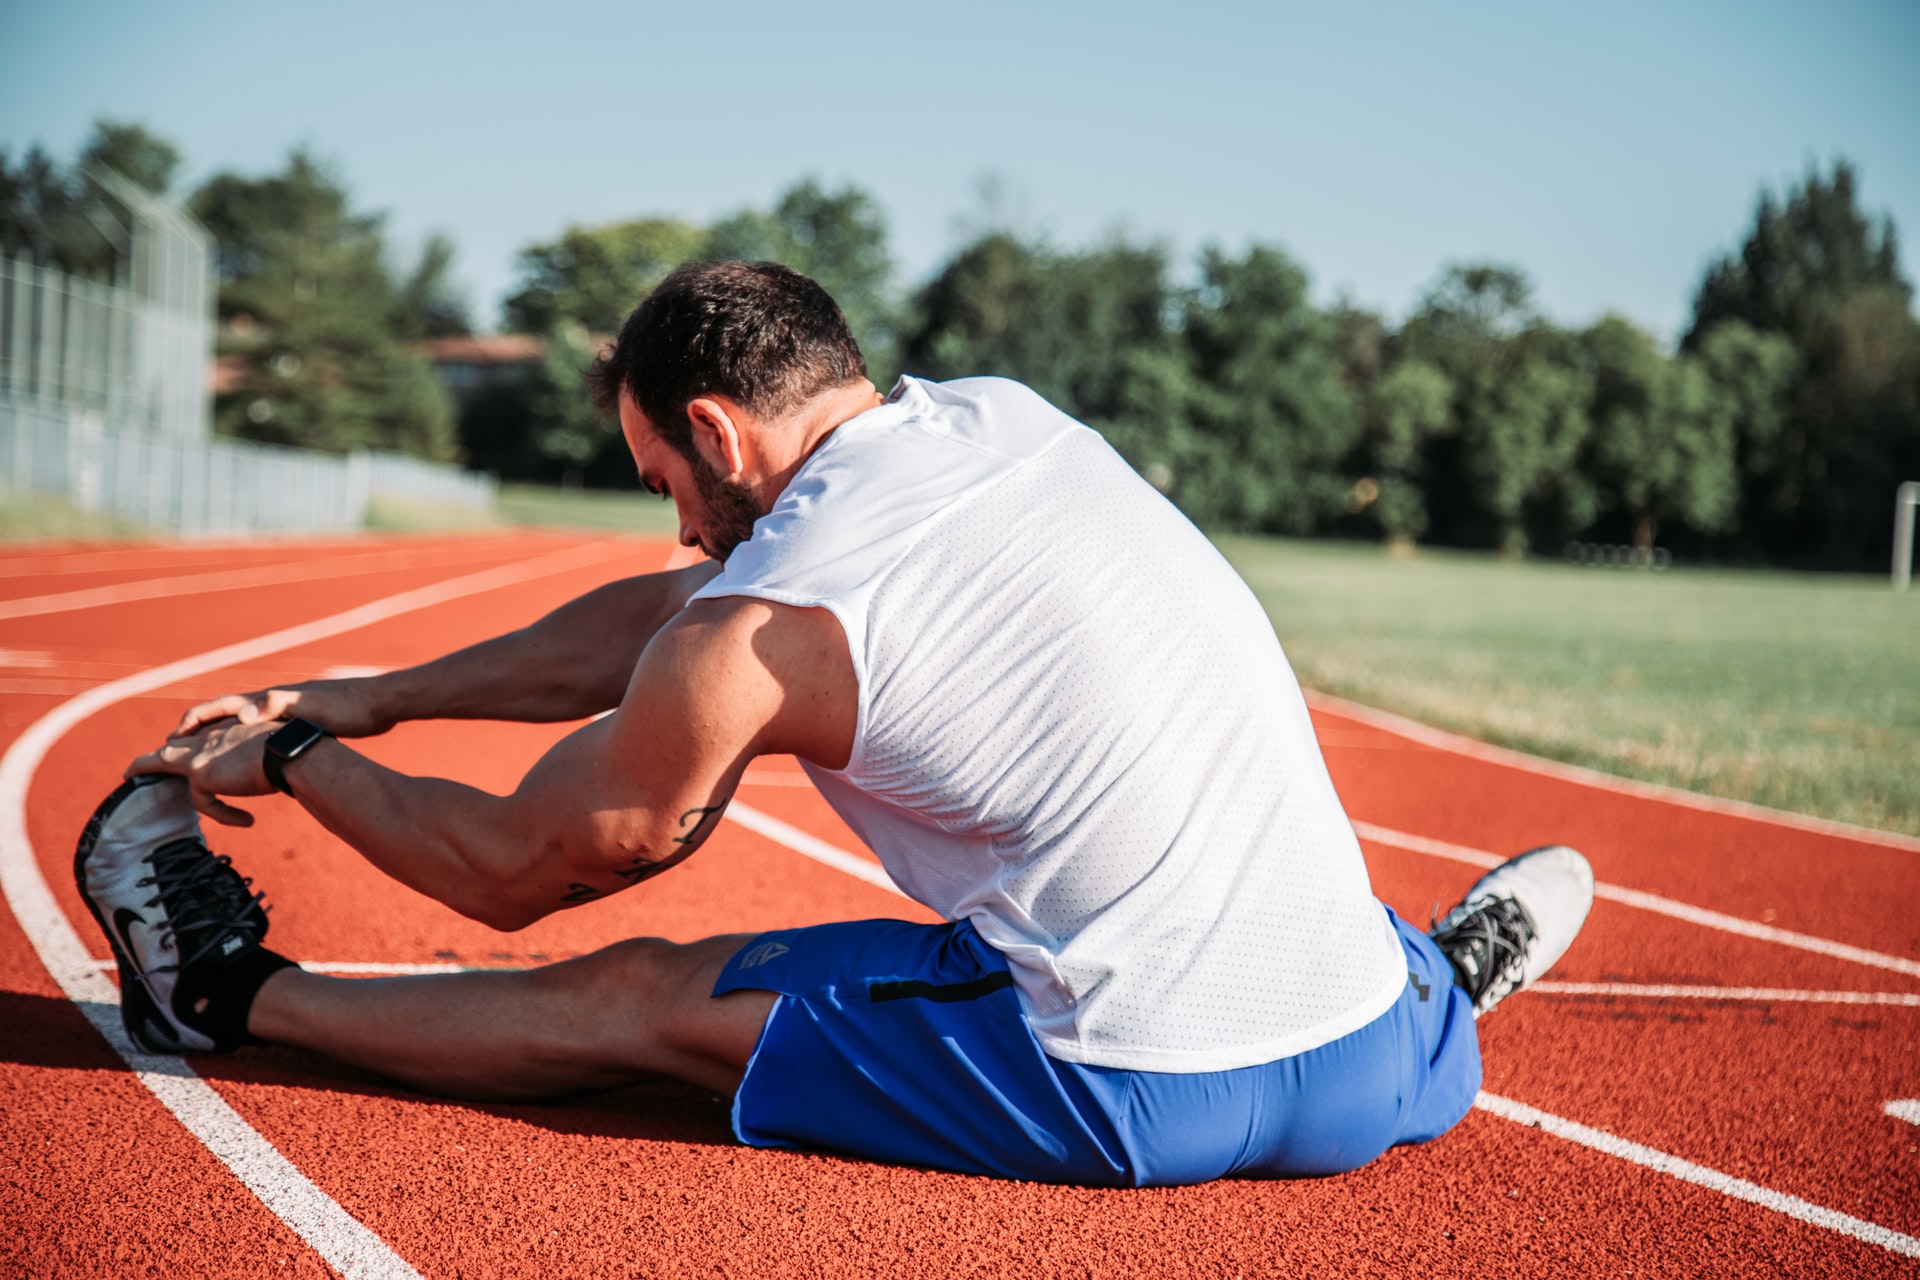 Be sure to warm up, cool down, and stretch to avoid injury.